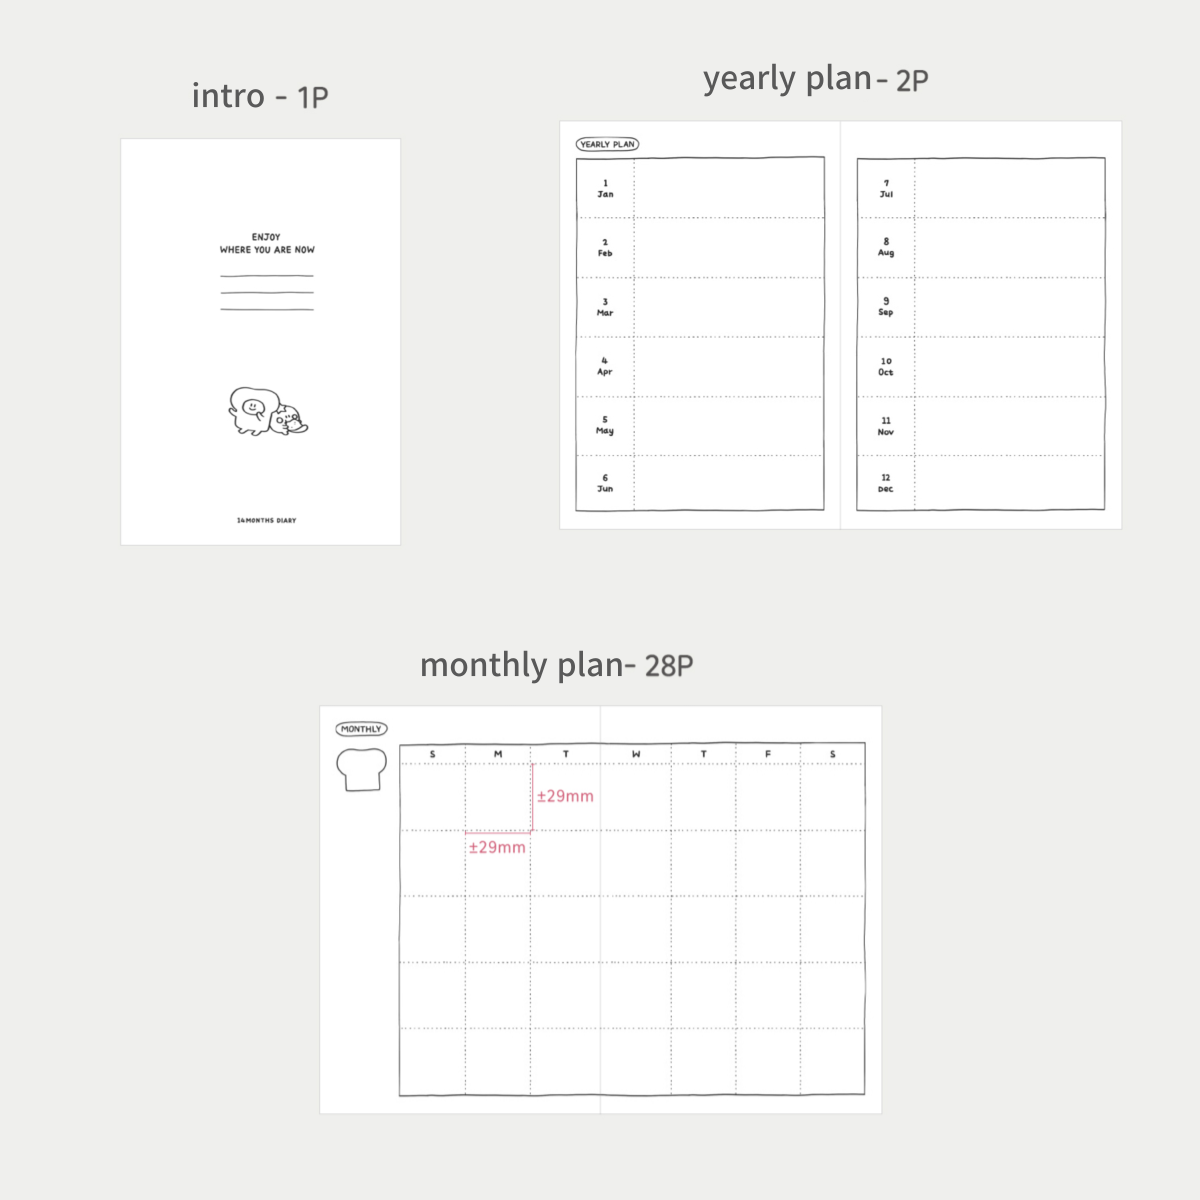 toast korean undated planner intro yearly plan monthly